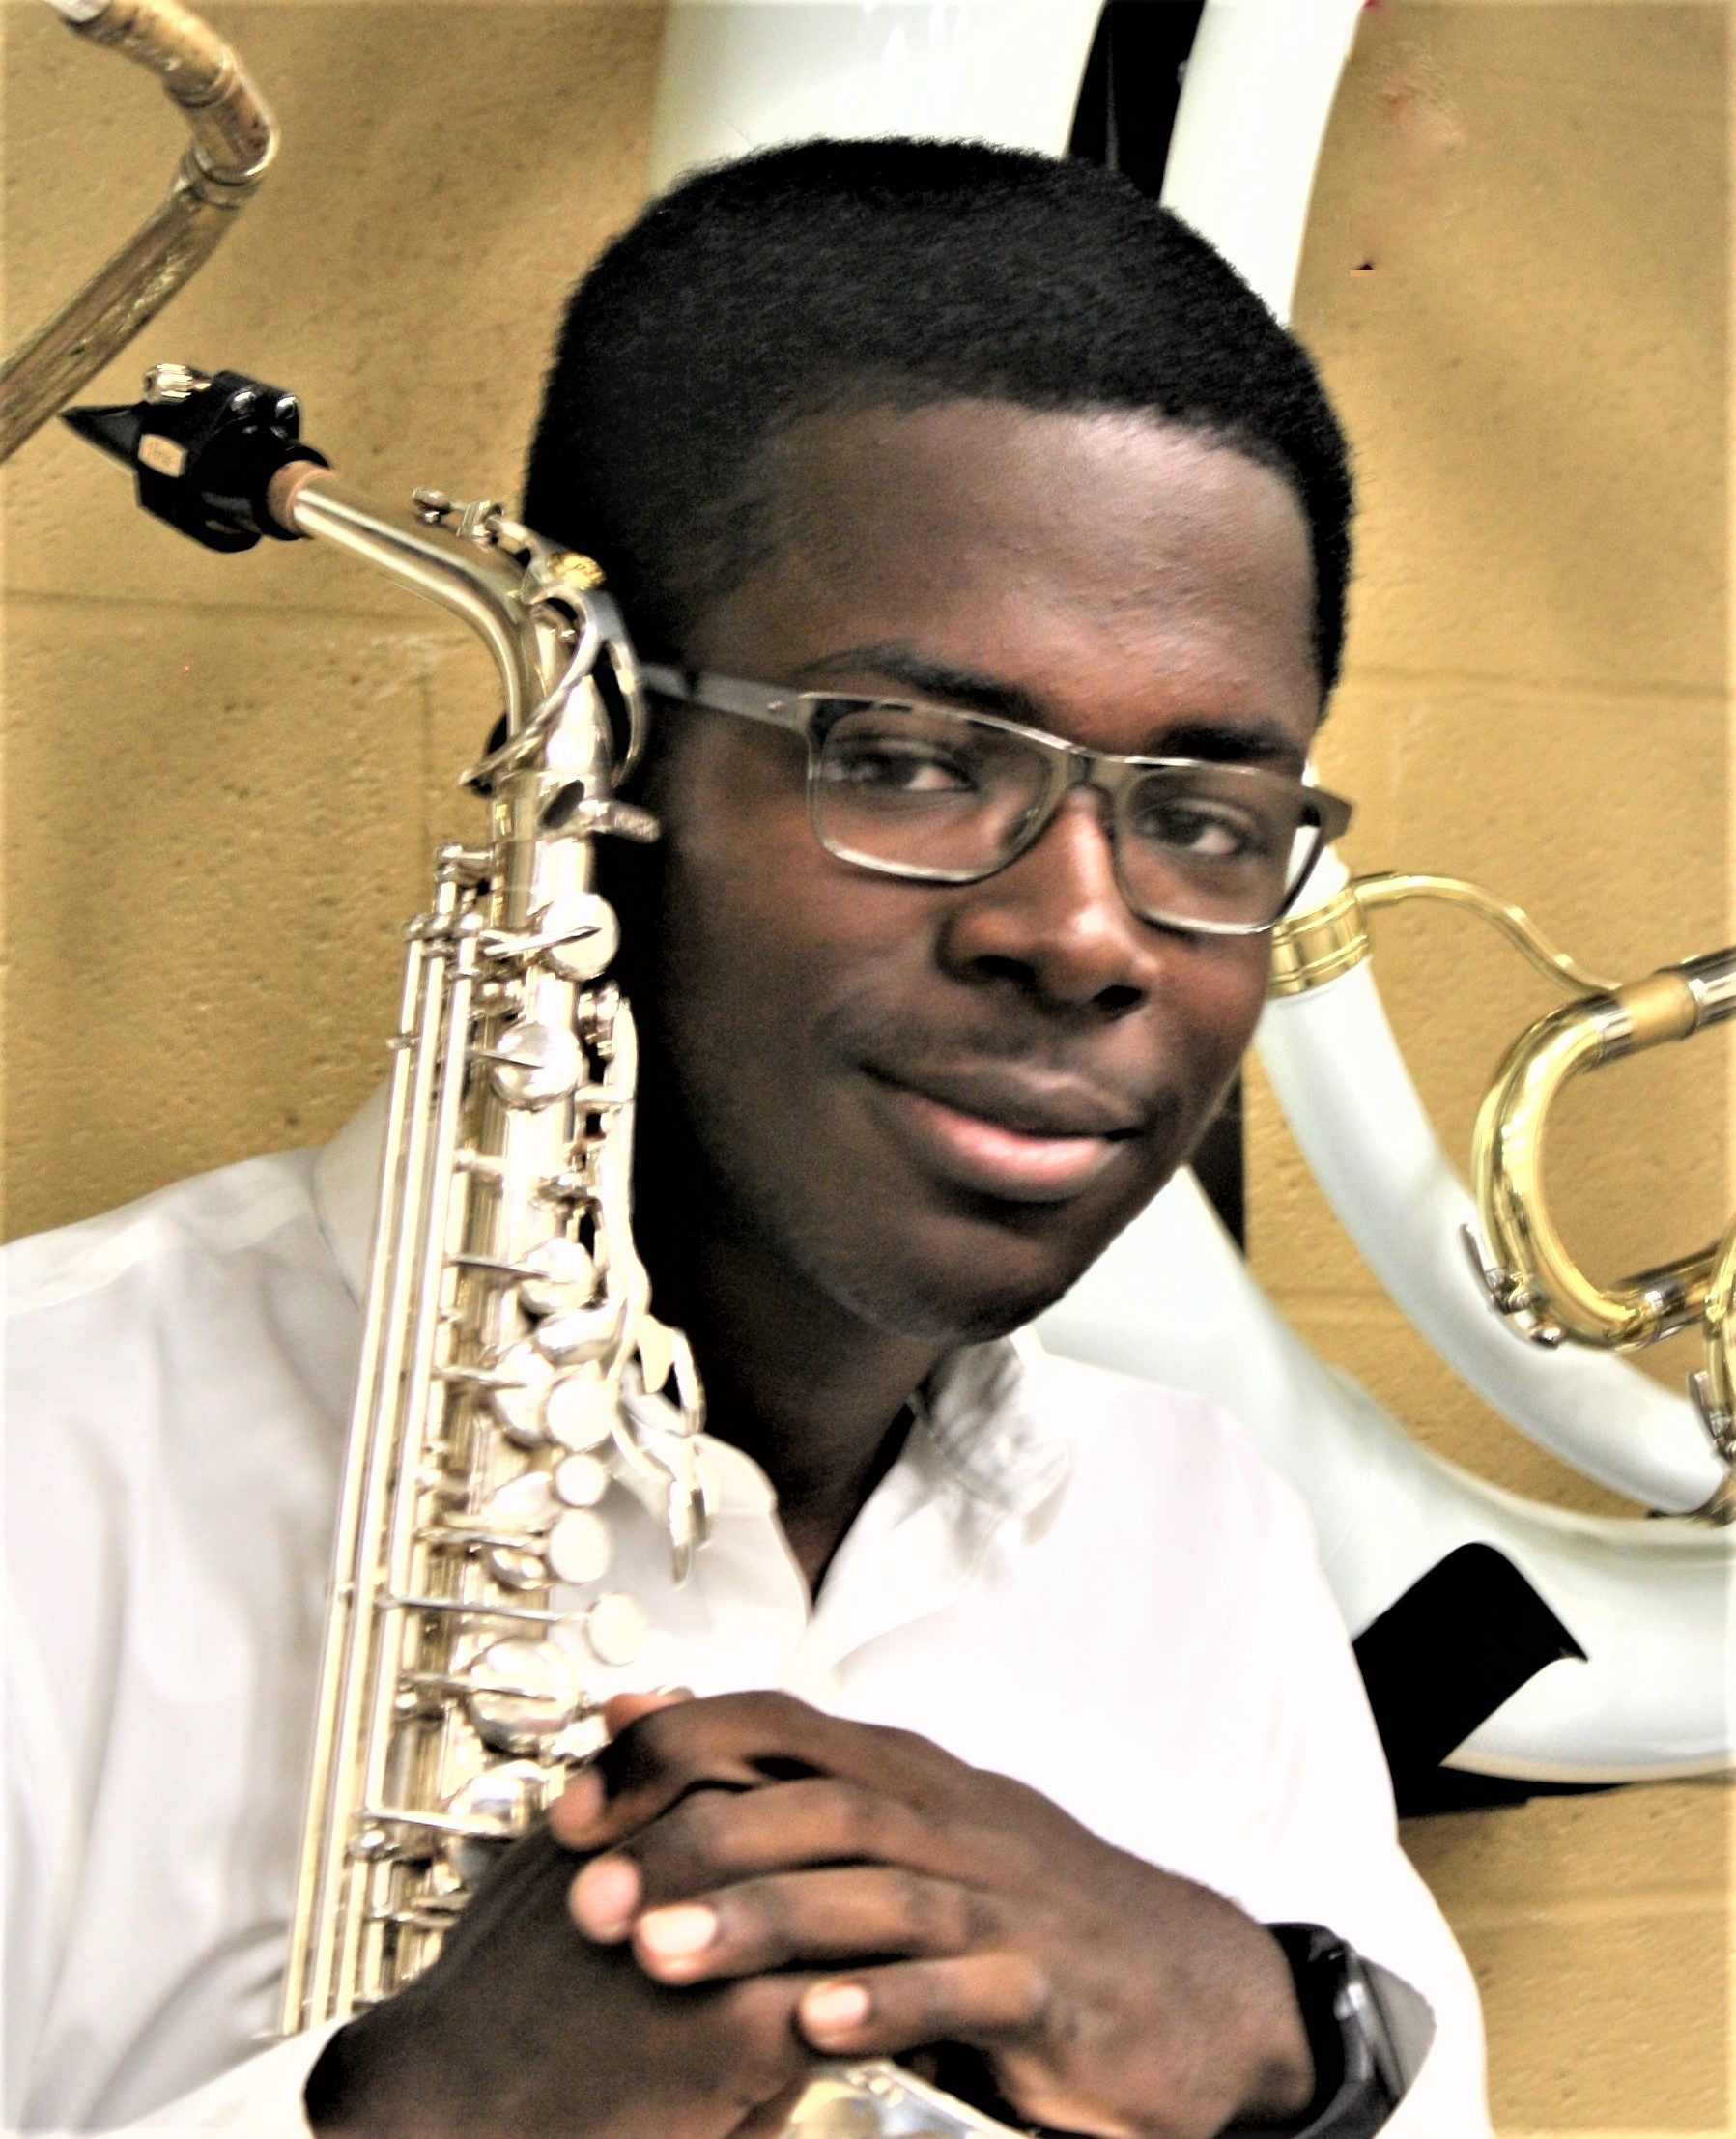 Antwan Howard to join state band